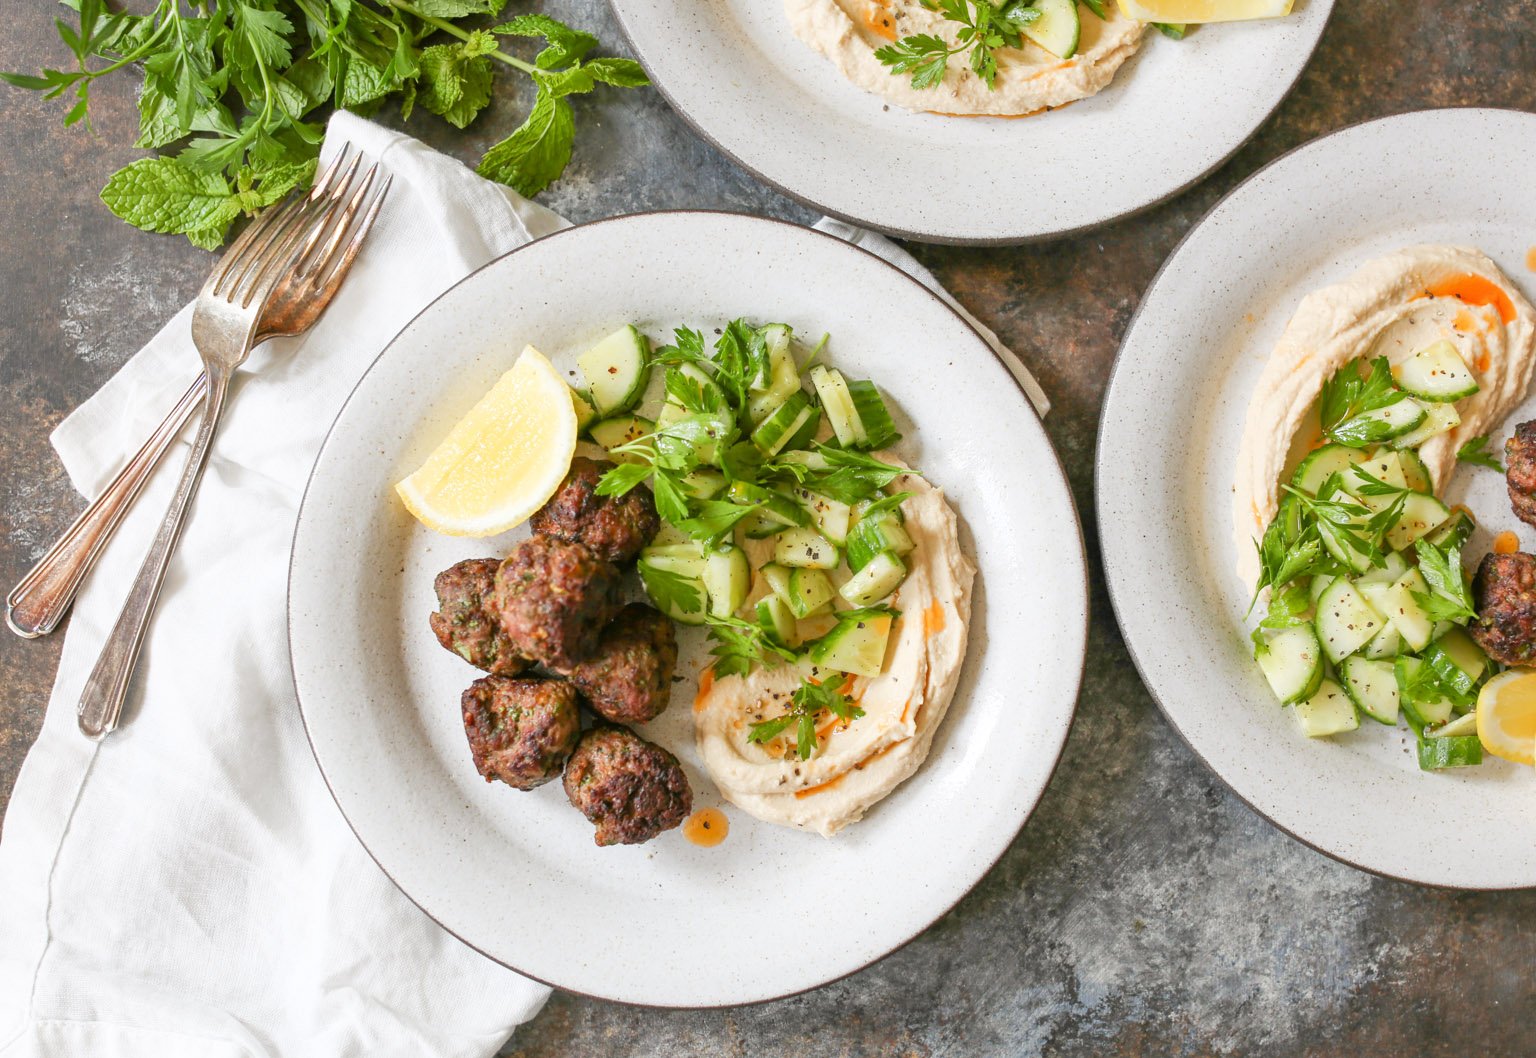 Overhead view of plated lamb kofta with hummus, cucumber salad, and lemon with napkins and forks. 